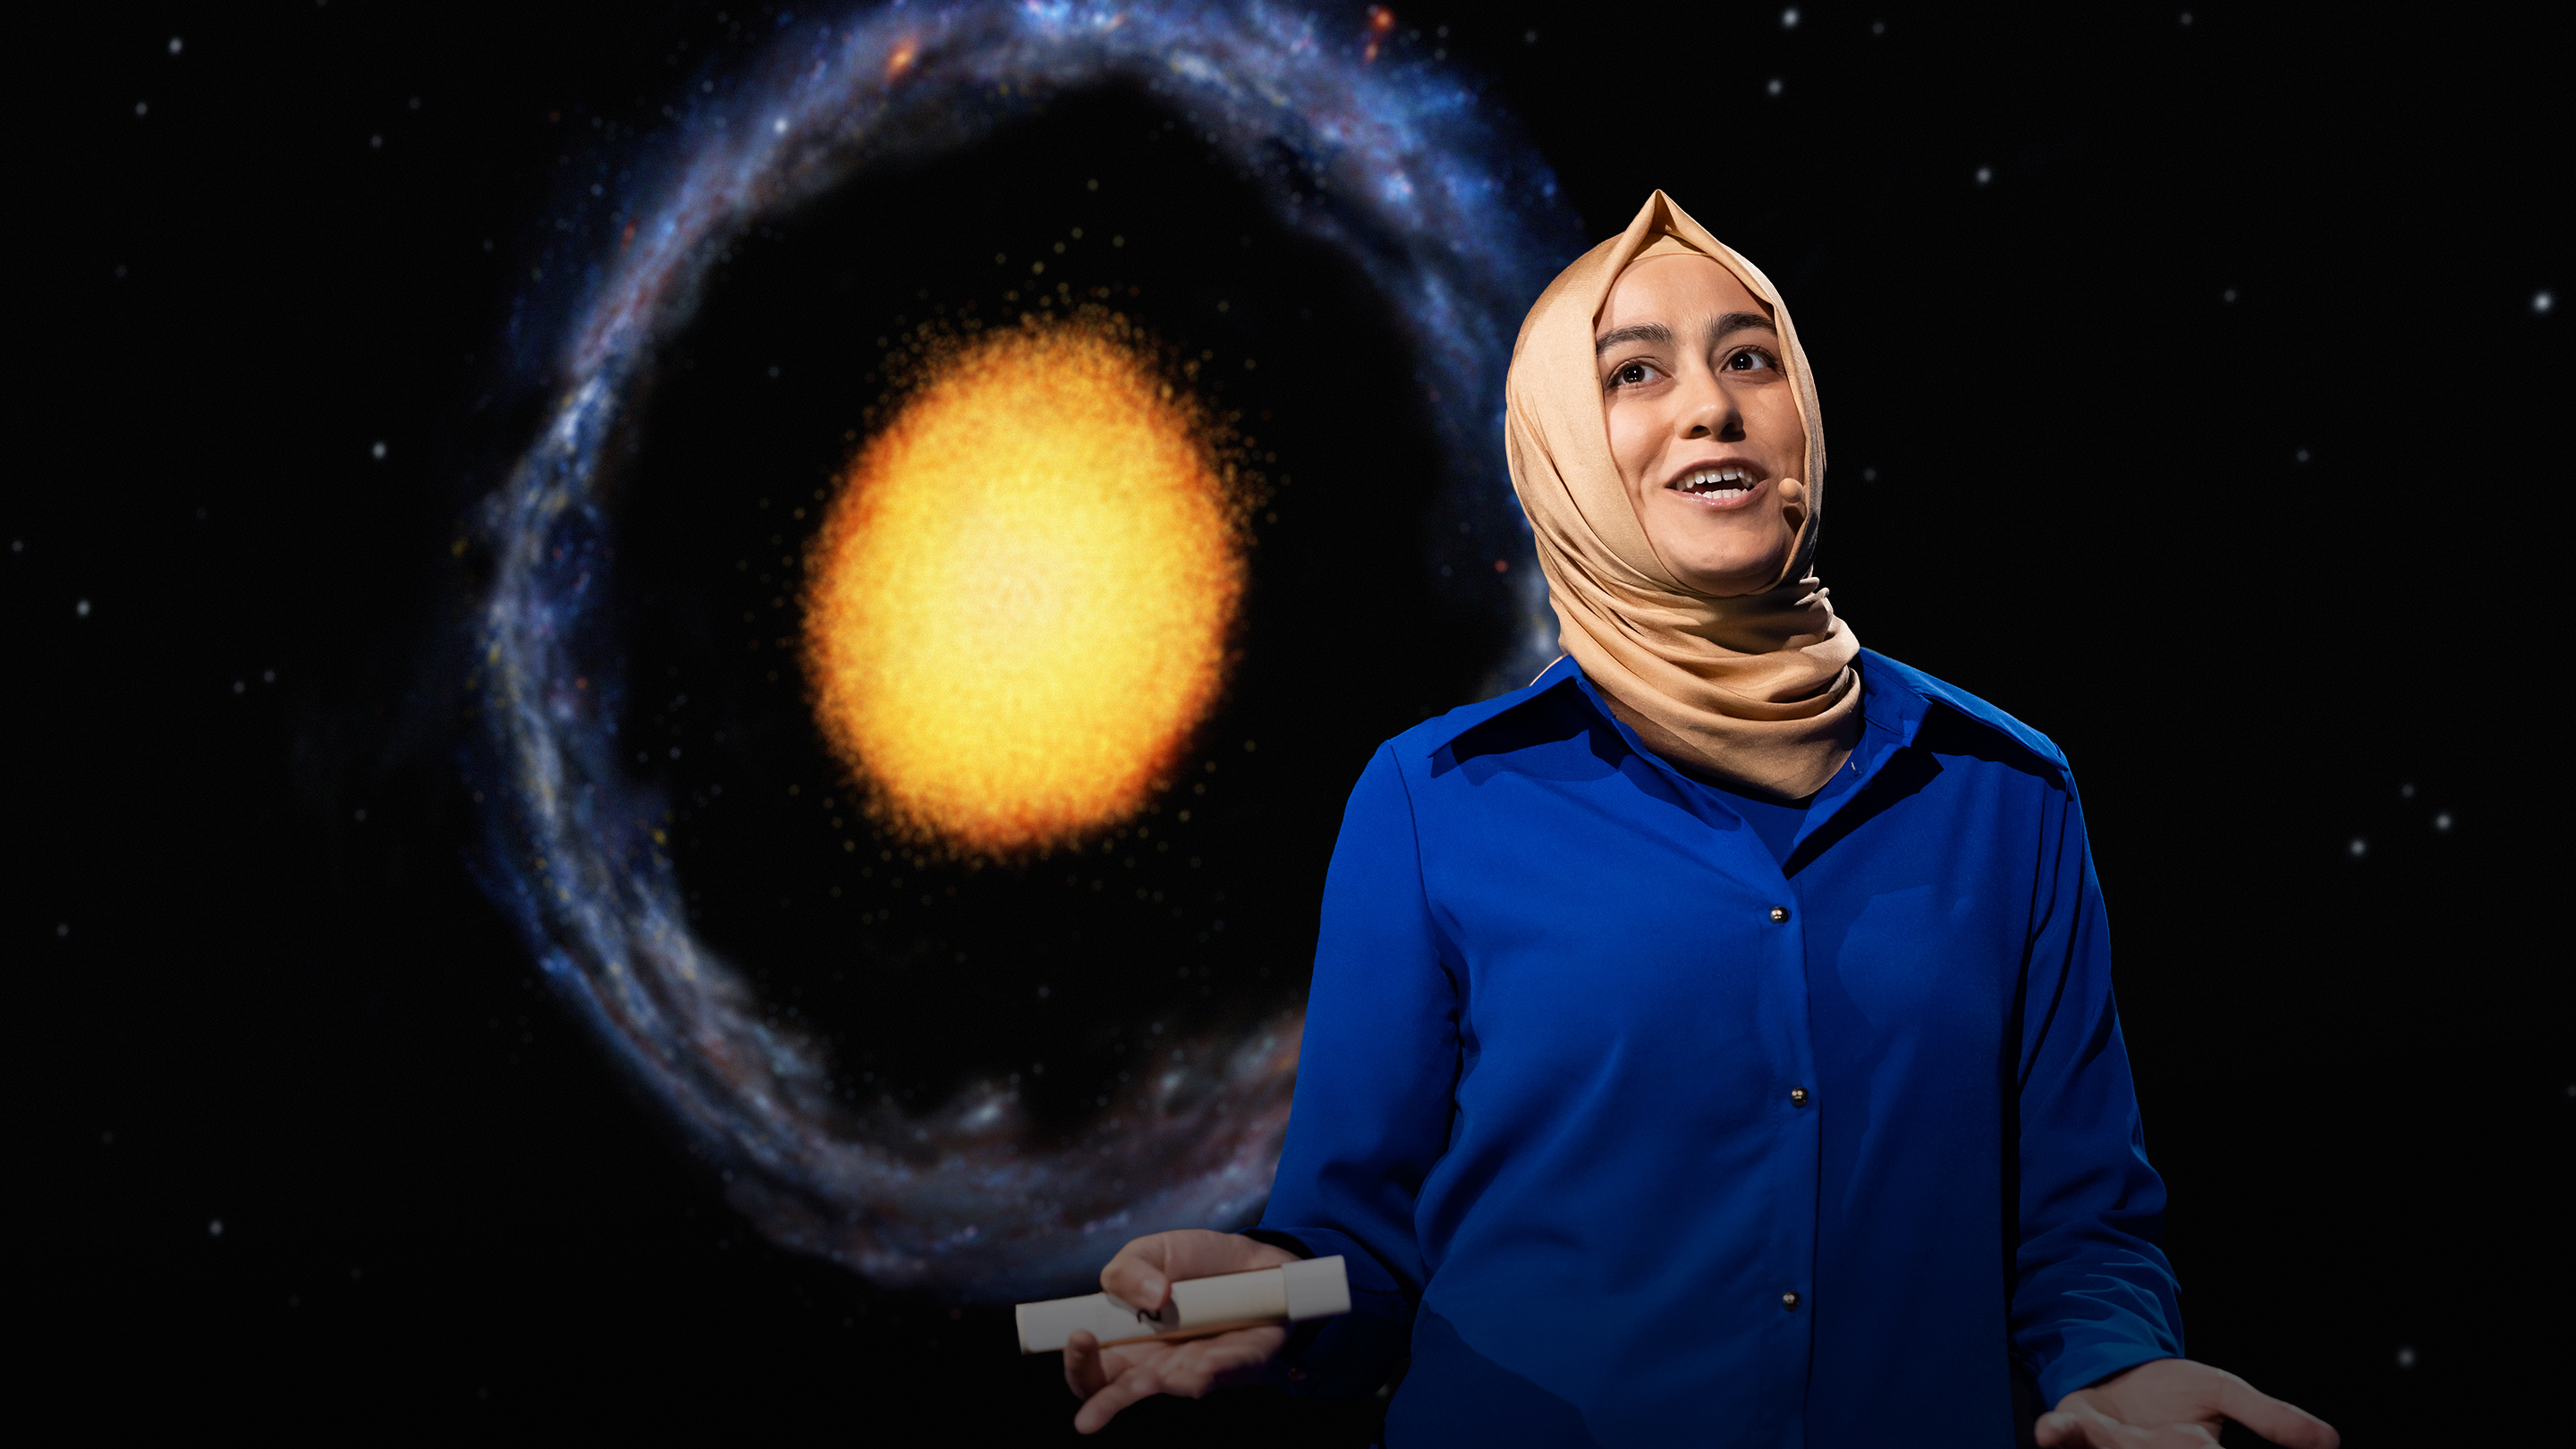 This Muslimah Scientist Discovered A New Galaxy And Its Now Named After Her